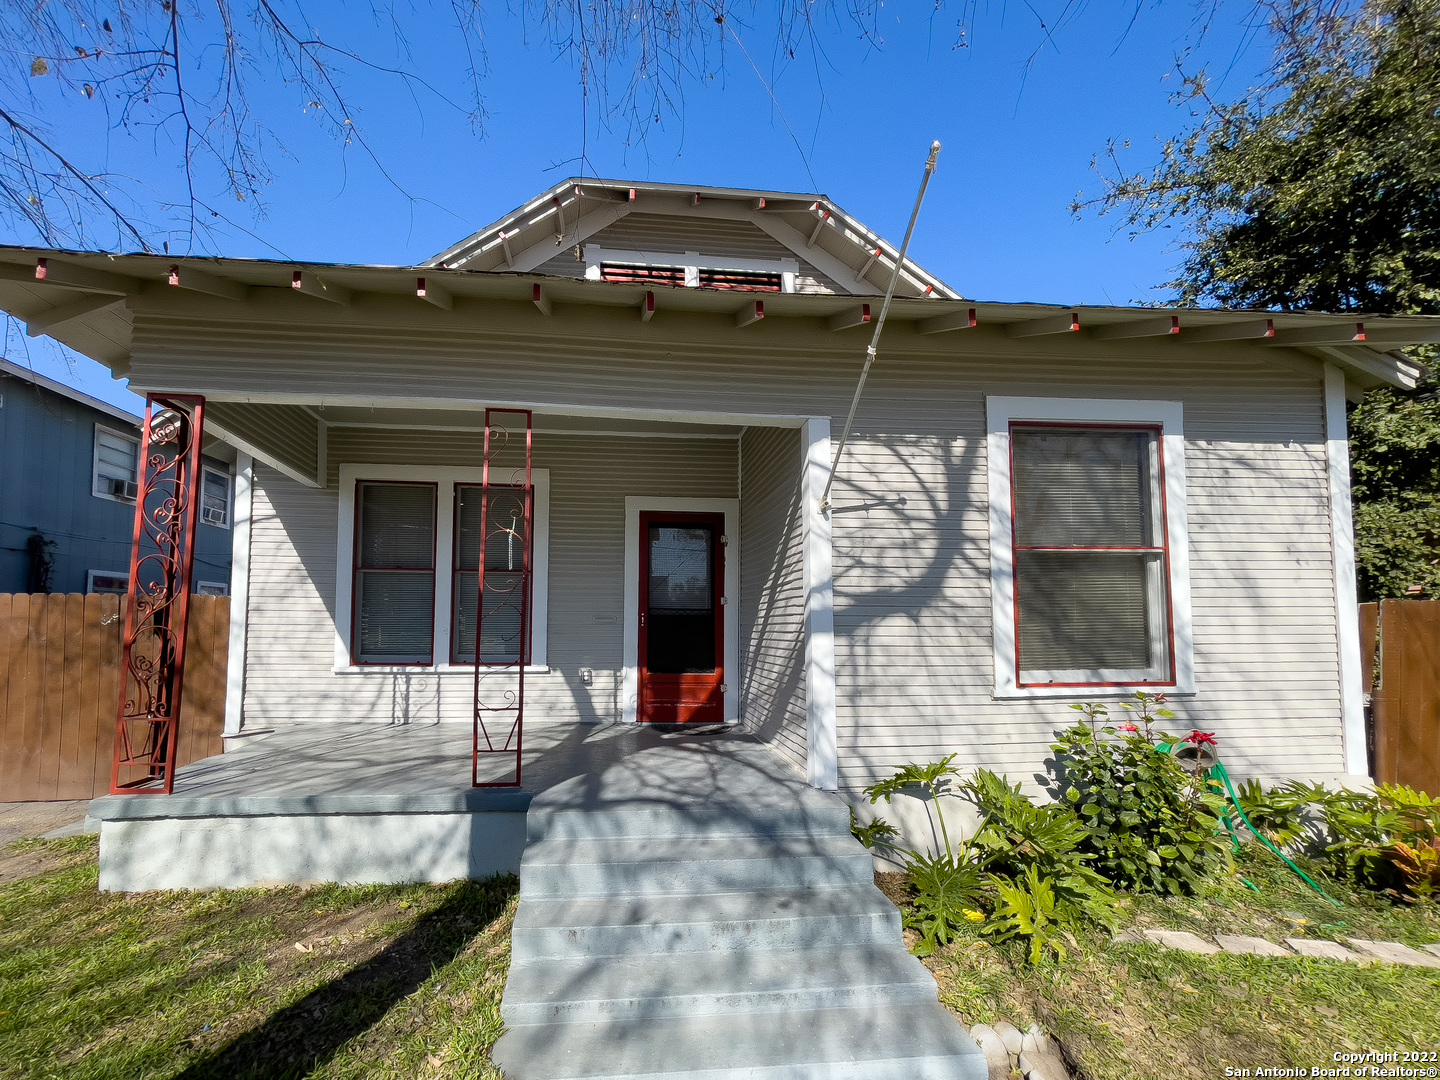 Quaint little home in the heart of the Southside. Original hardwood floors, lots of windows for natural light, and high ceilings. Schedule your appointment today! This home will not last long.